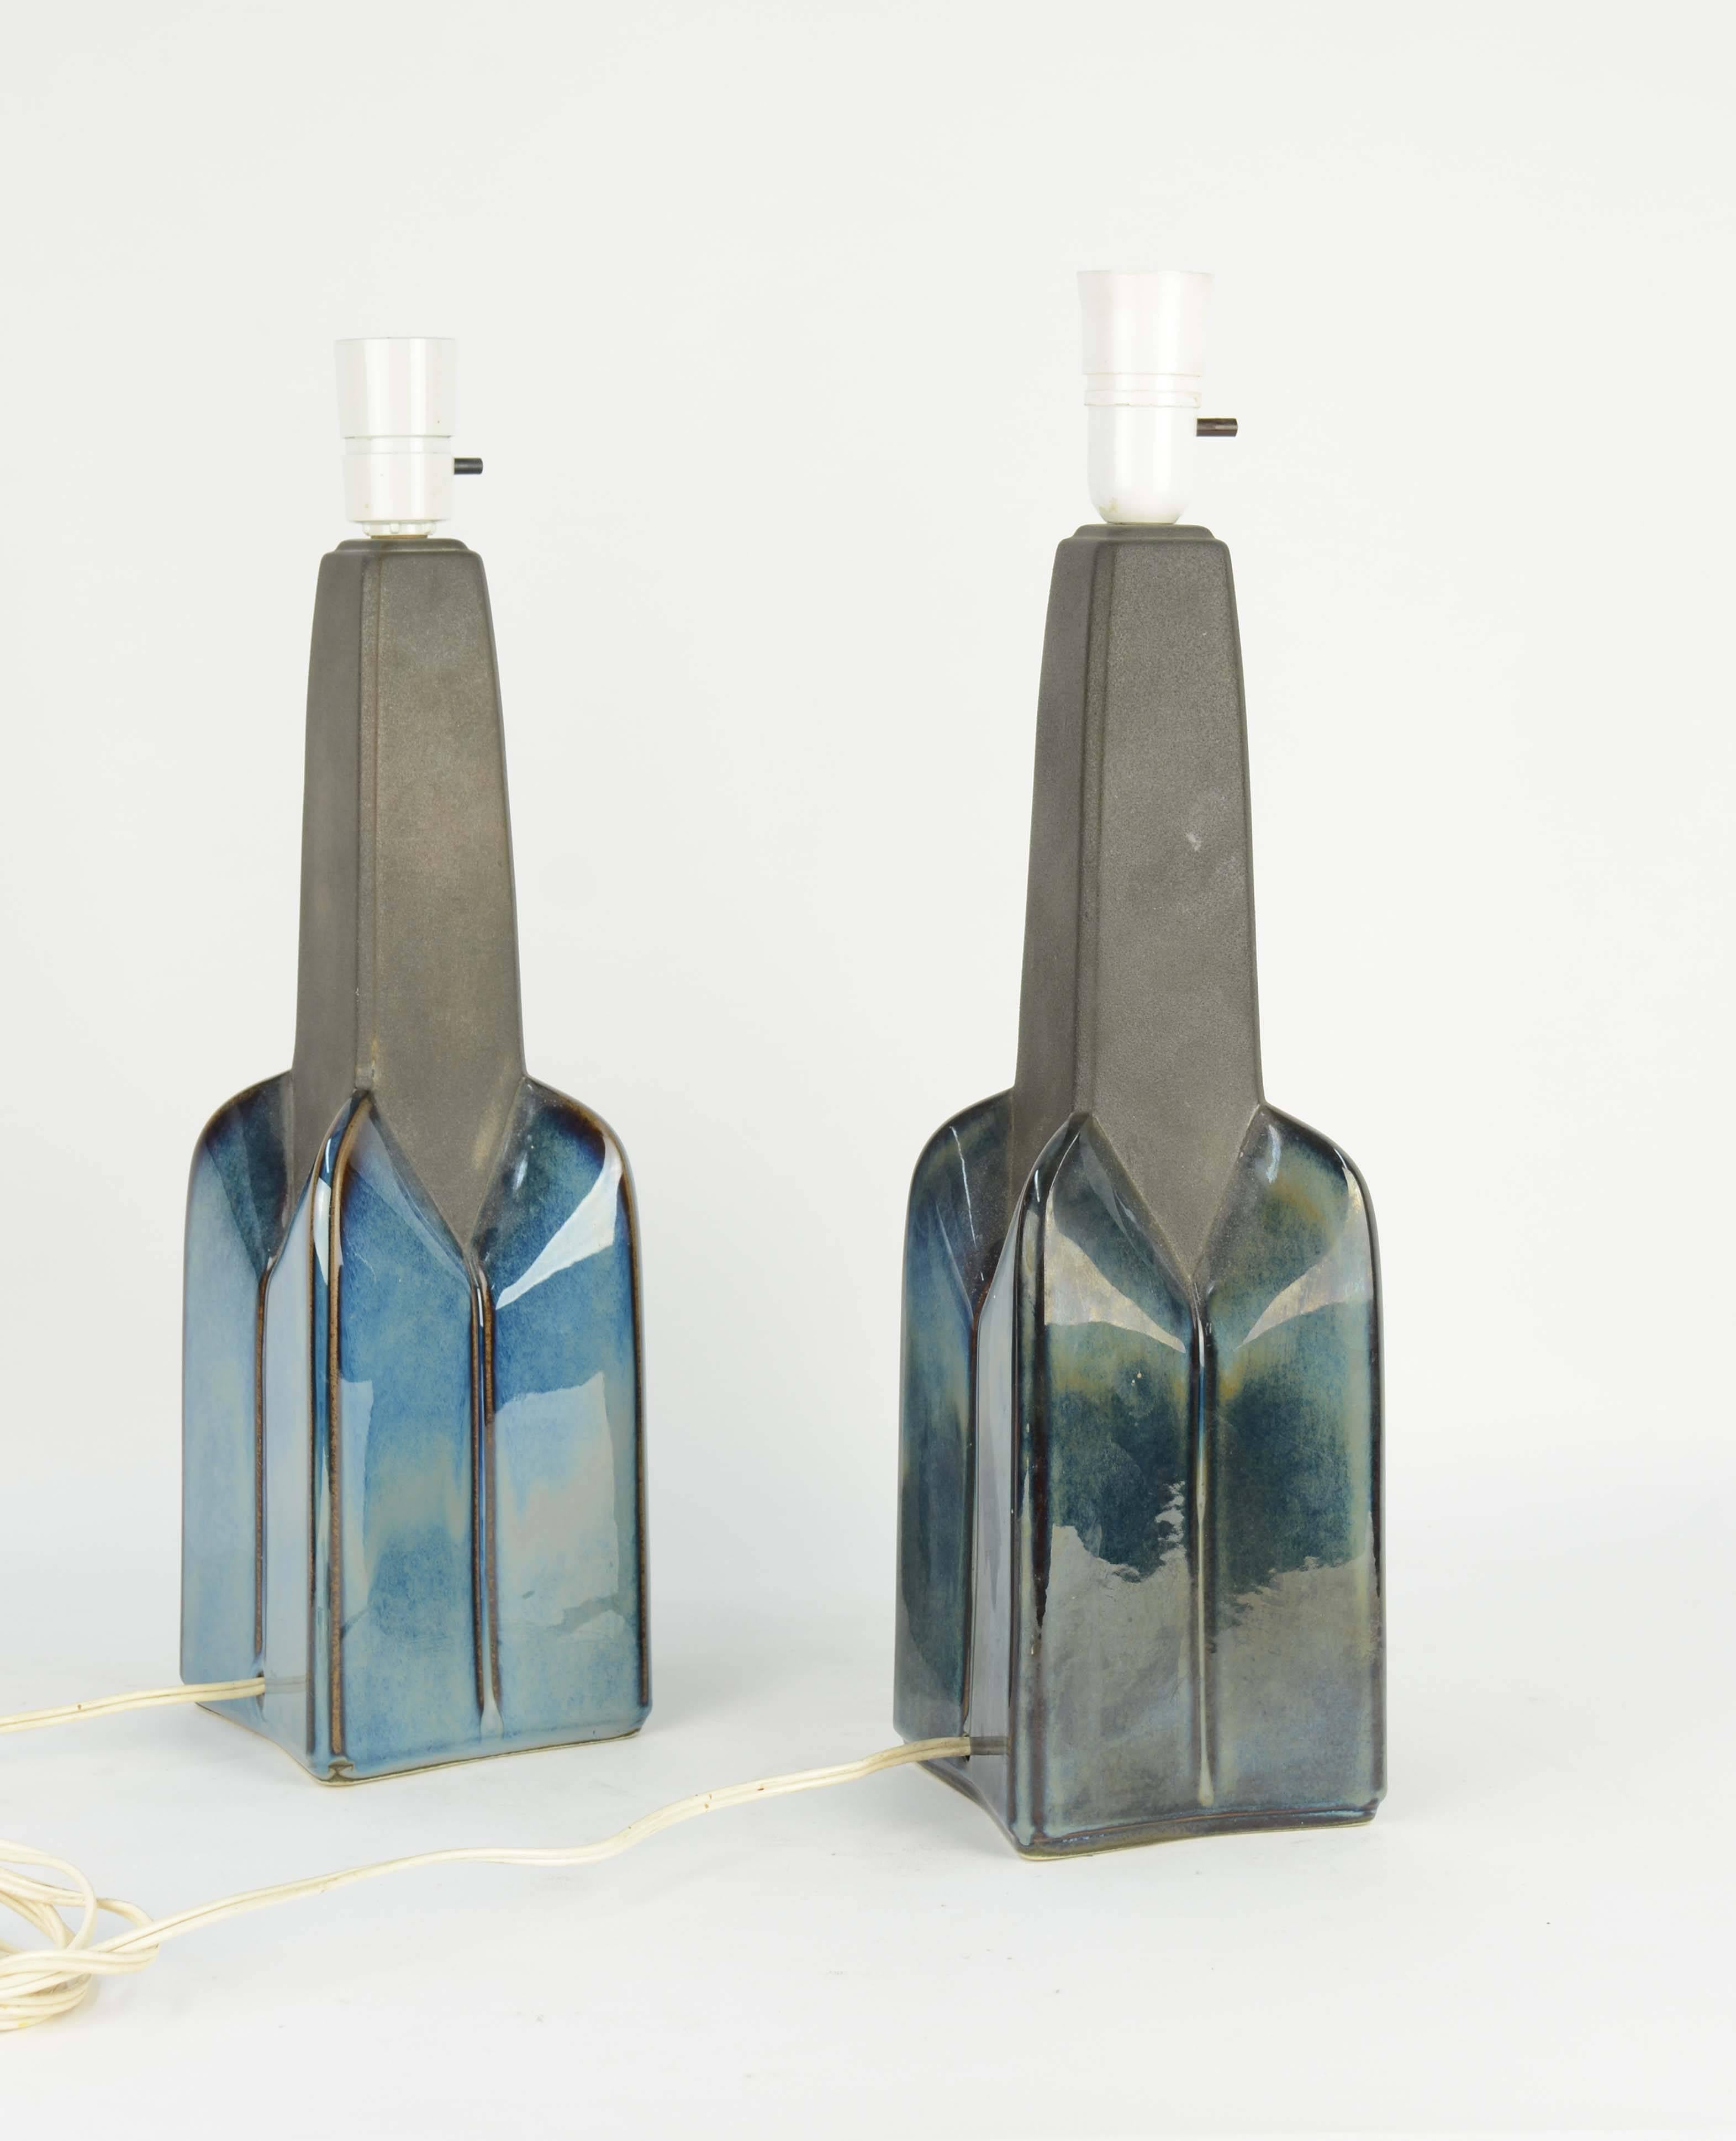 Pair of Soholm Stentoj of Denmark Ceramic Lamps by Einar Johansen In Good Condition For Sale In Portland, OR